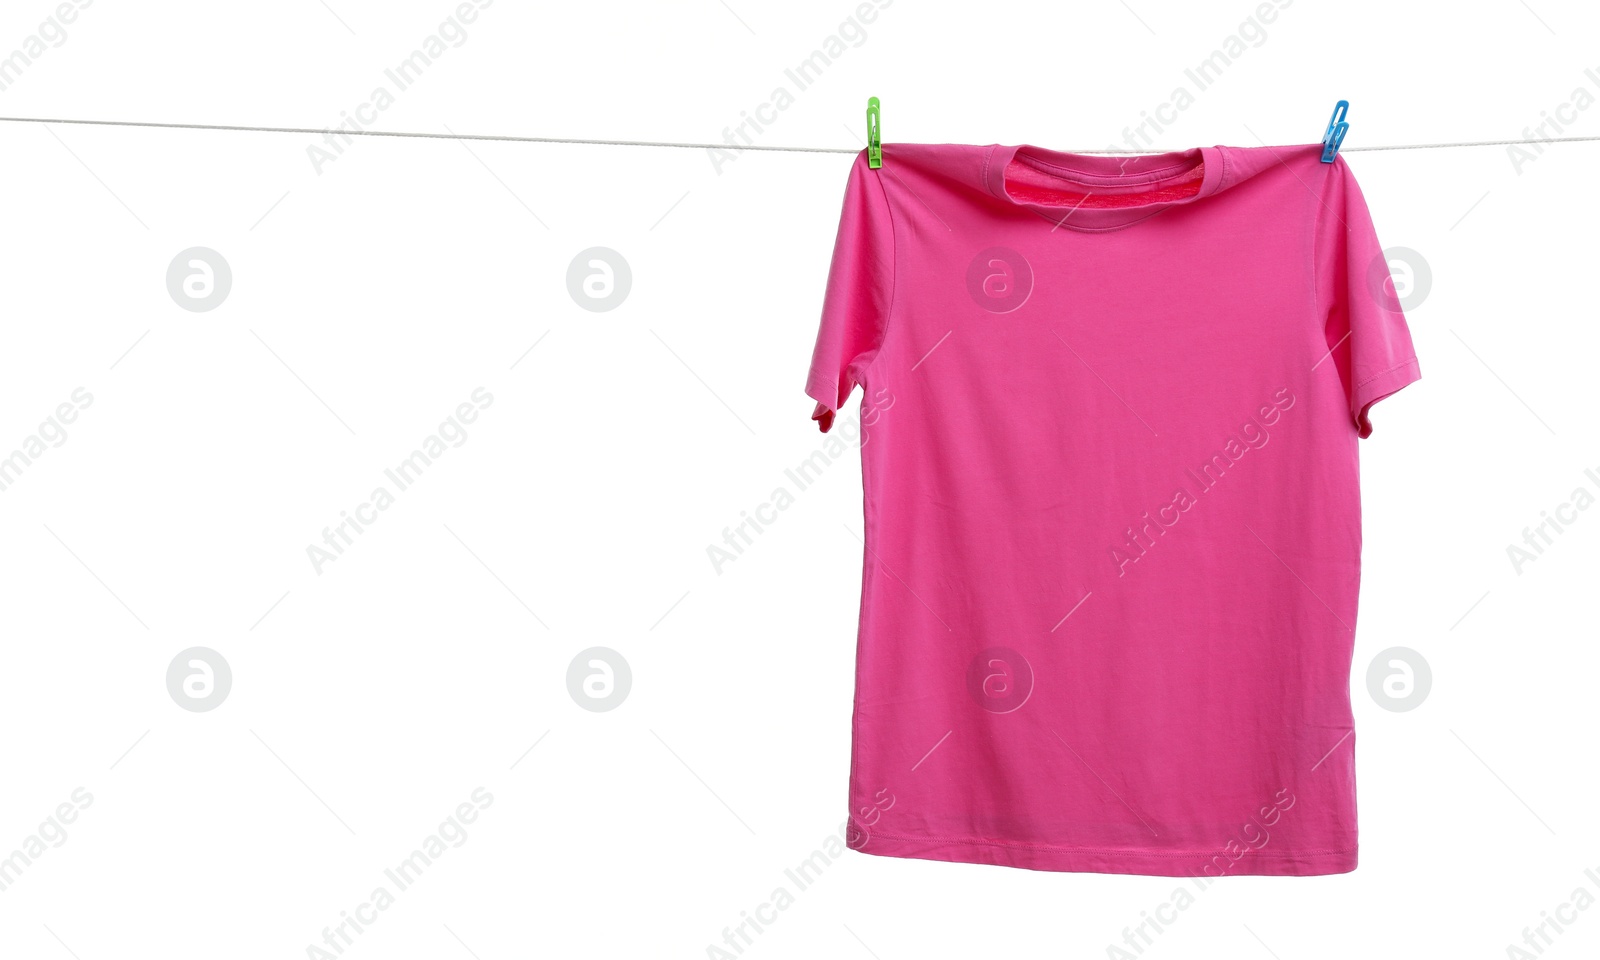 Photo of Pink t-shirt drying on washing line against white background